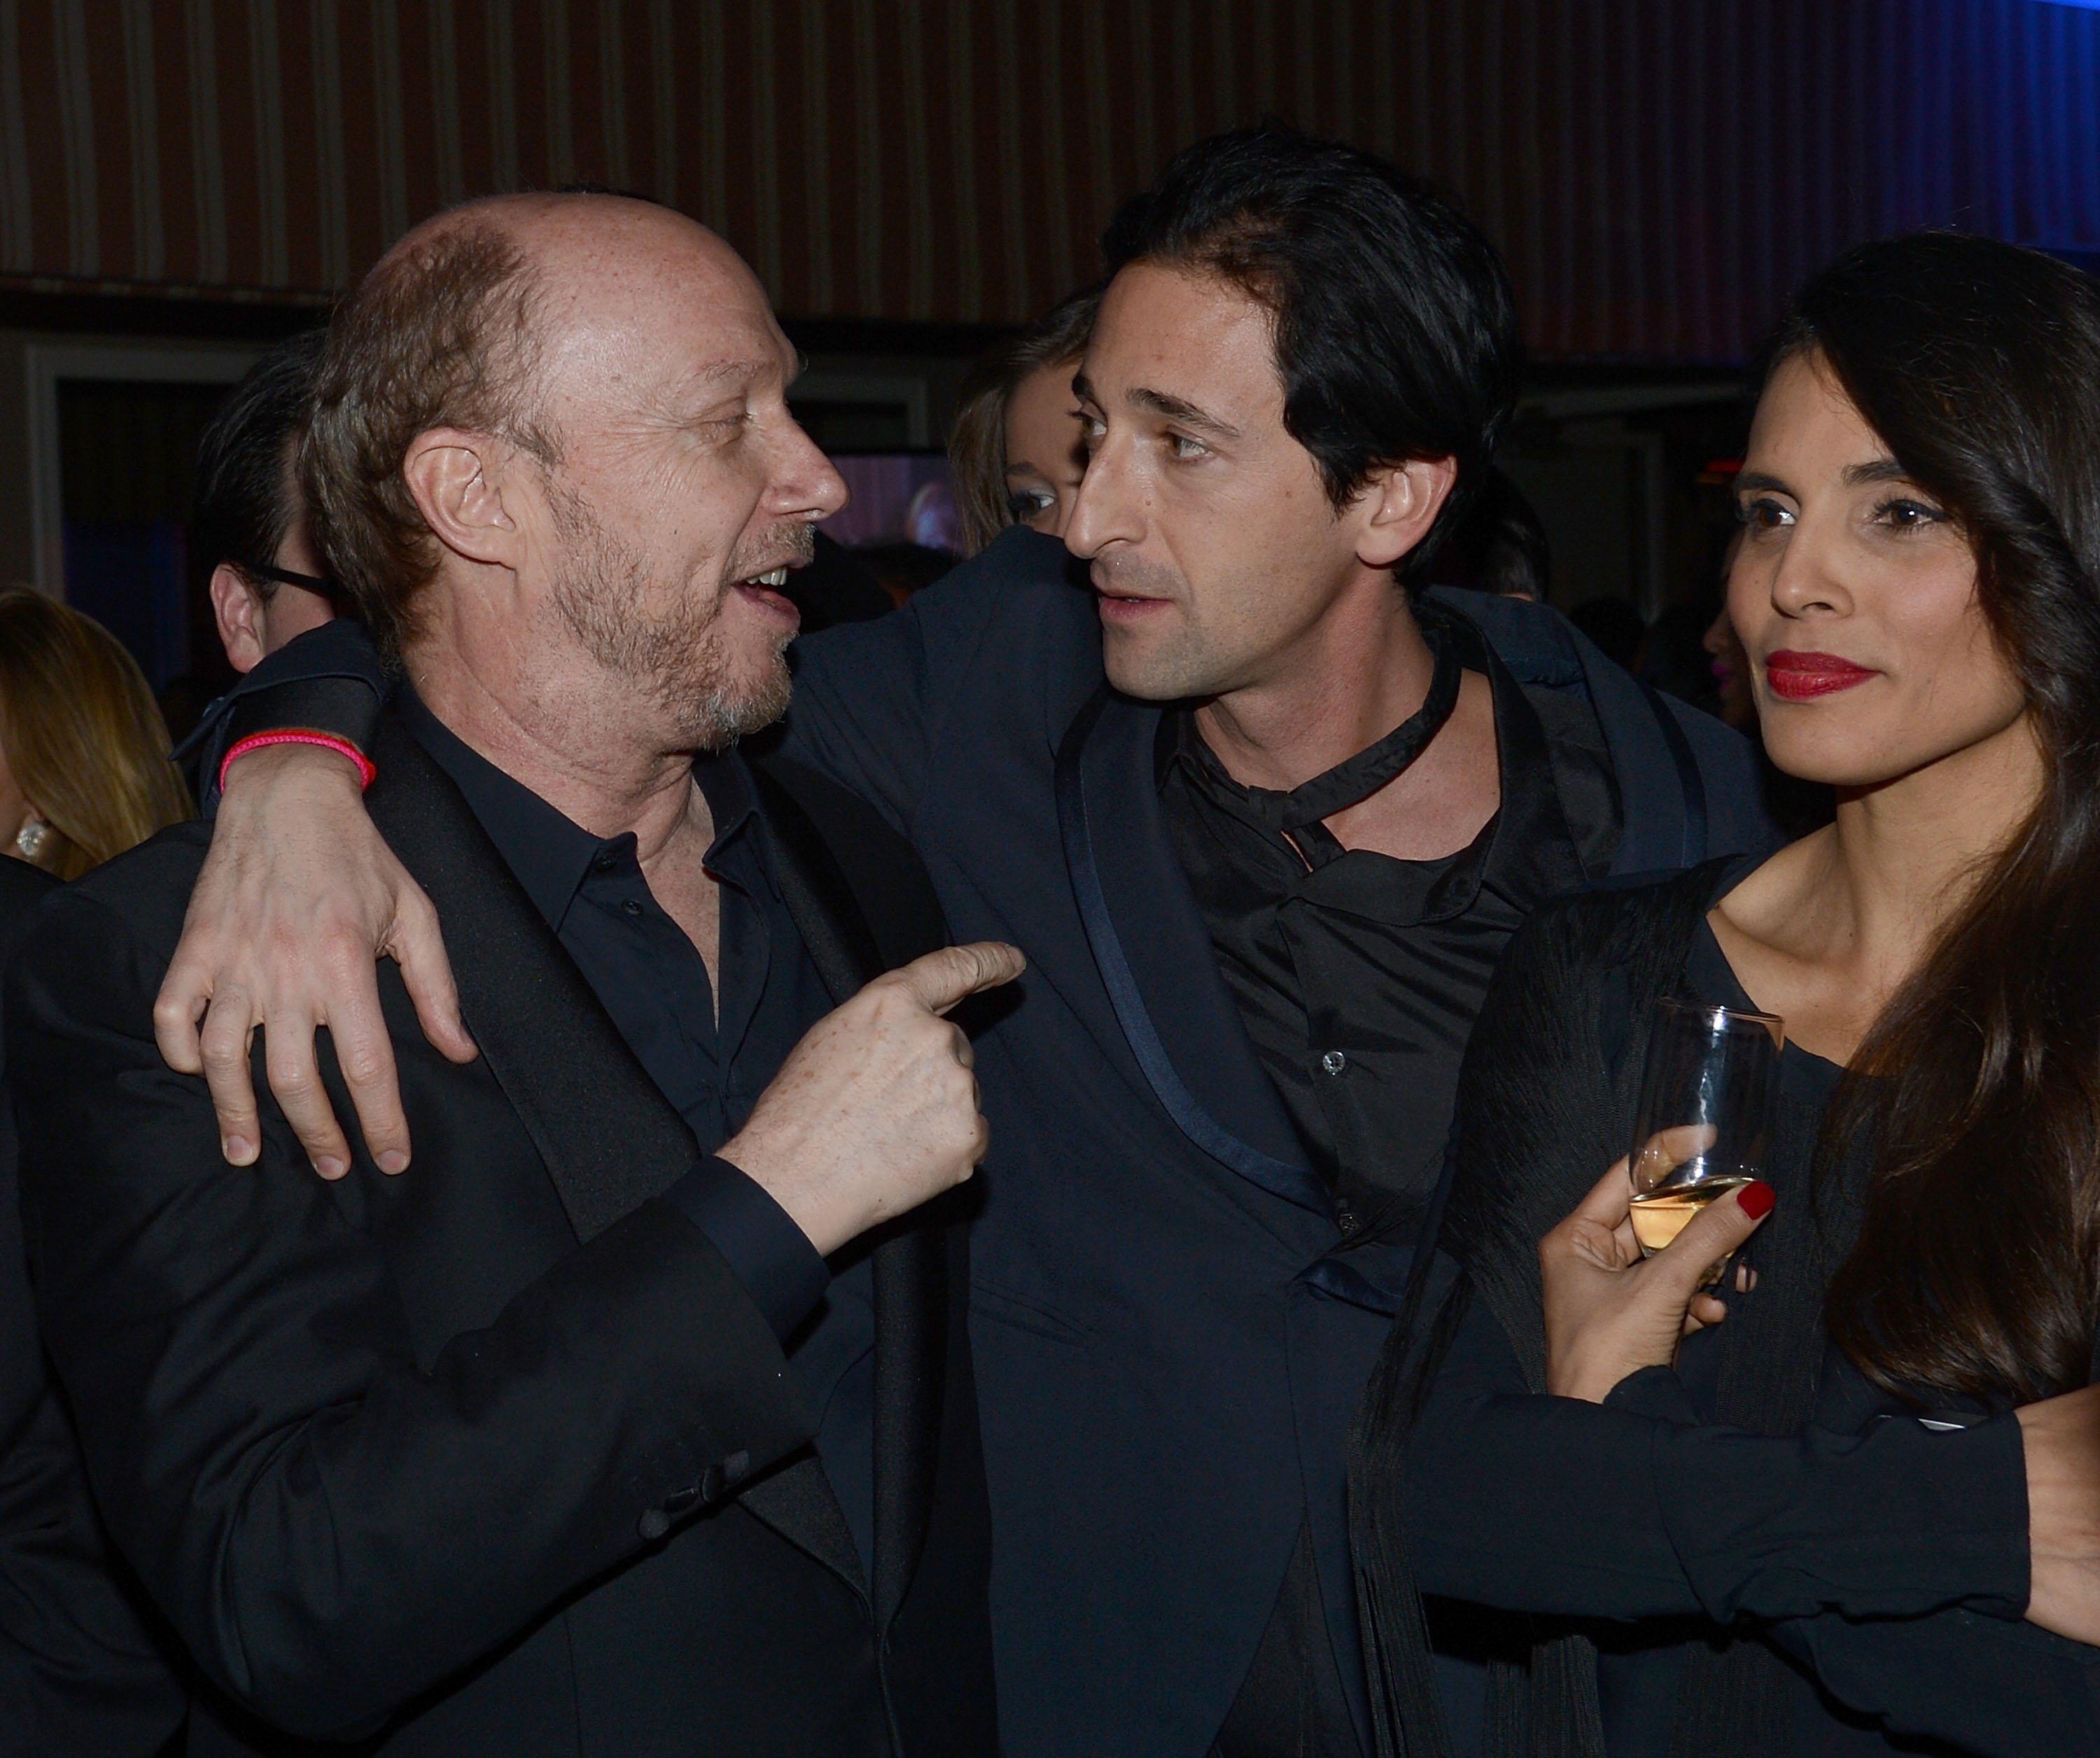 WEST HOLLYWOOD, CA - FEBRUARY 21:  Screenwriter Paul Haggis and actor Adrien Brody attends the Hollywood Domino and Bovet 1822 Gala benefiting Artists For Peace And Justice at Sunset Tower on February 21, 2013 in West Hollywood, California.  (Photo by Chris Weeks/WireImage)